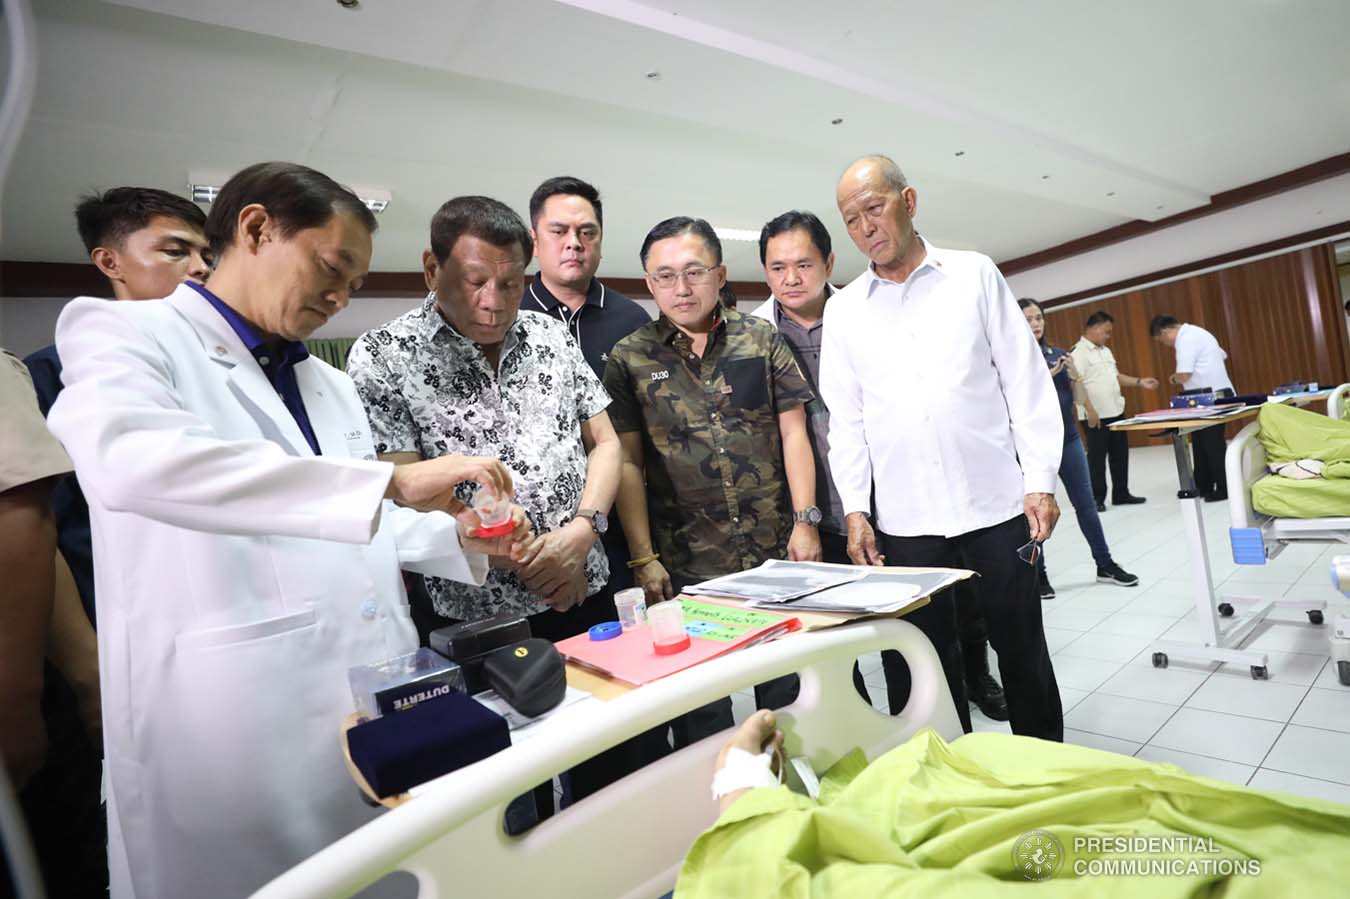 President Rodrigo Roa Duterte examines the injury of one of the wounded law enforcers he visited at the Divine Word Hospital in Tacloban City on November 15, 2019. ACE MORANDANTE/PRESIDENTIAL PHOTO